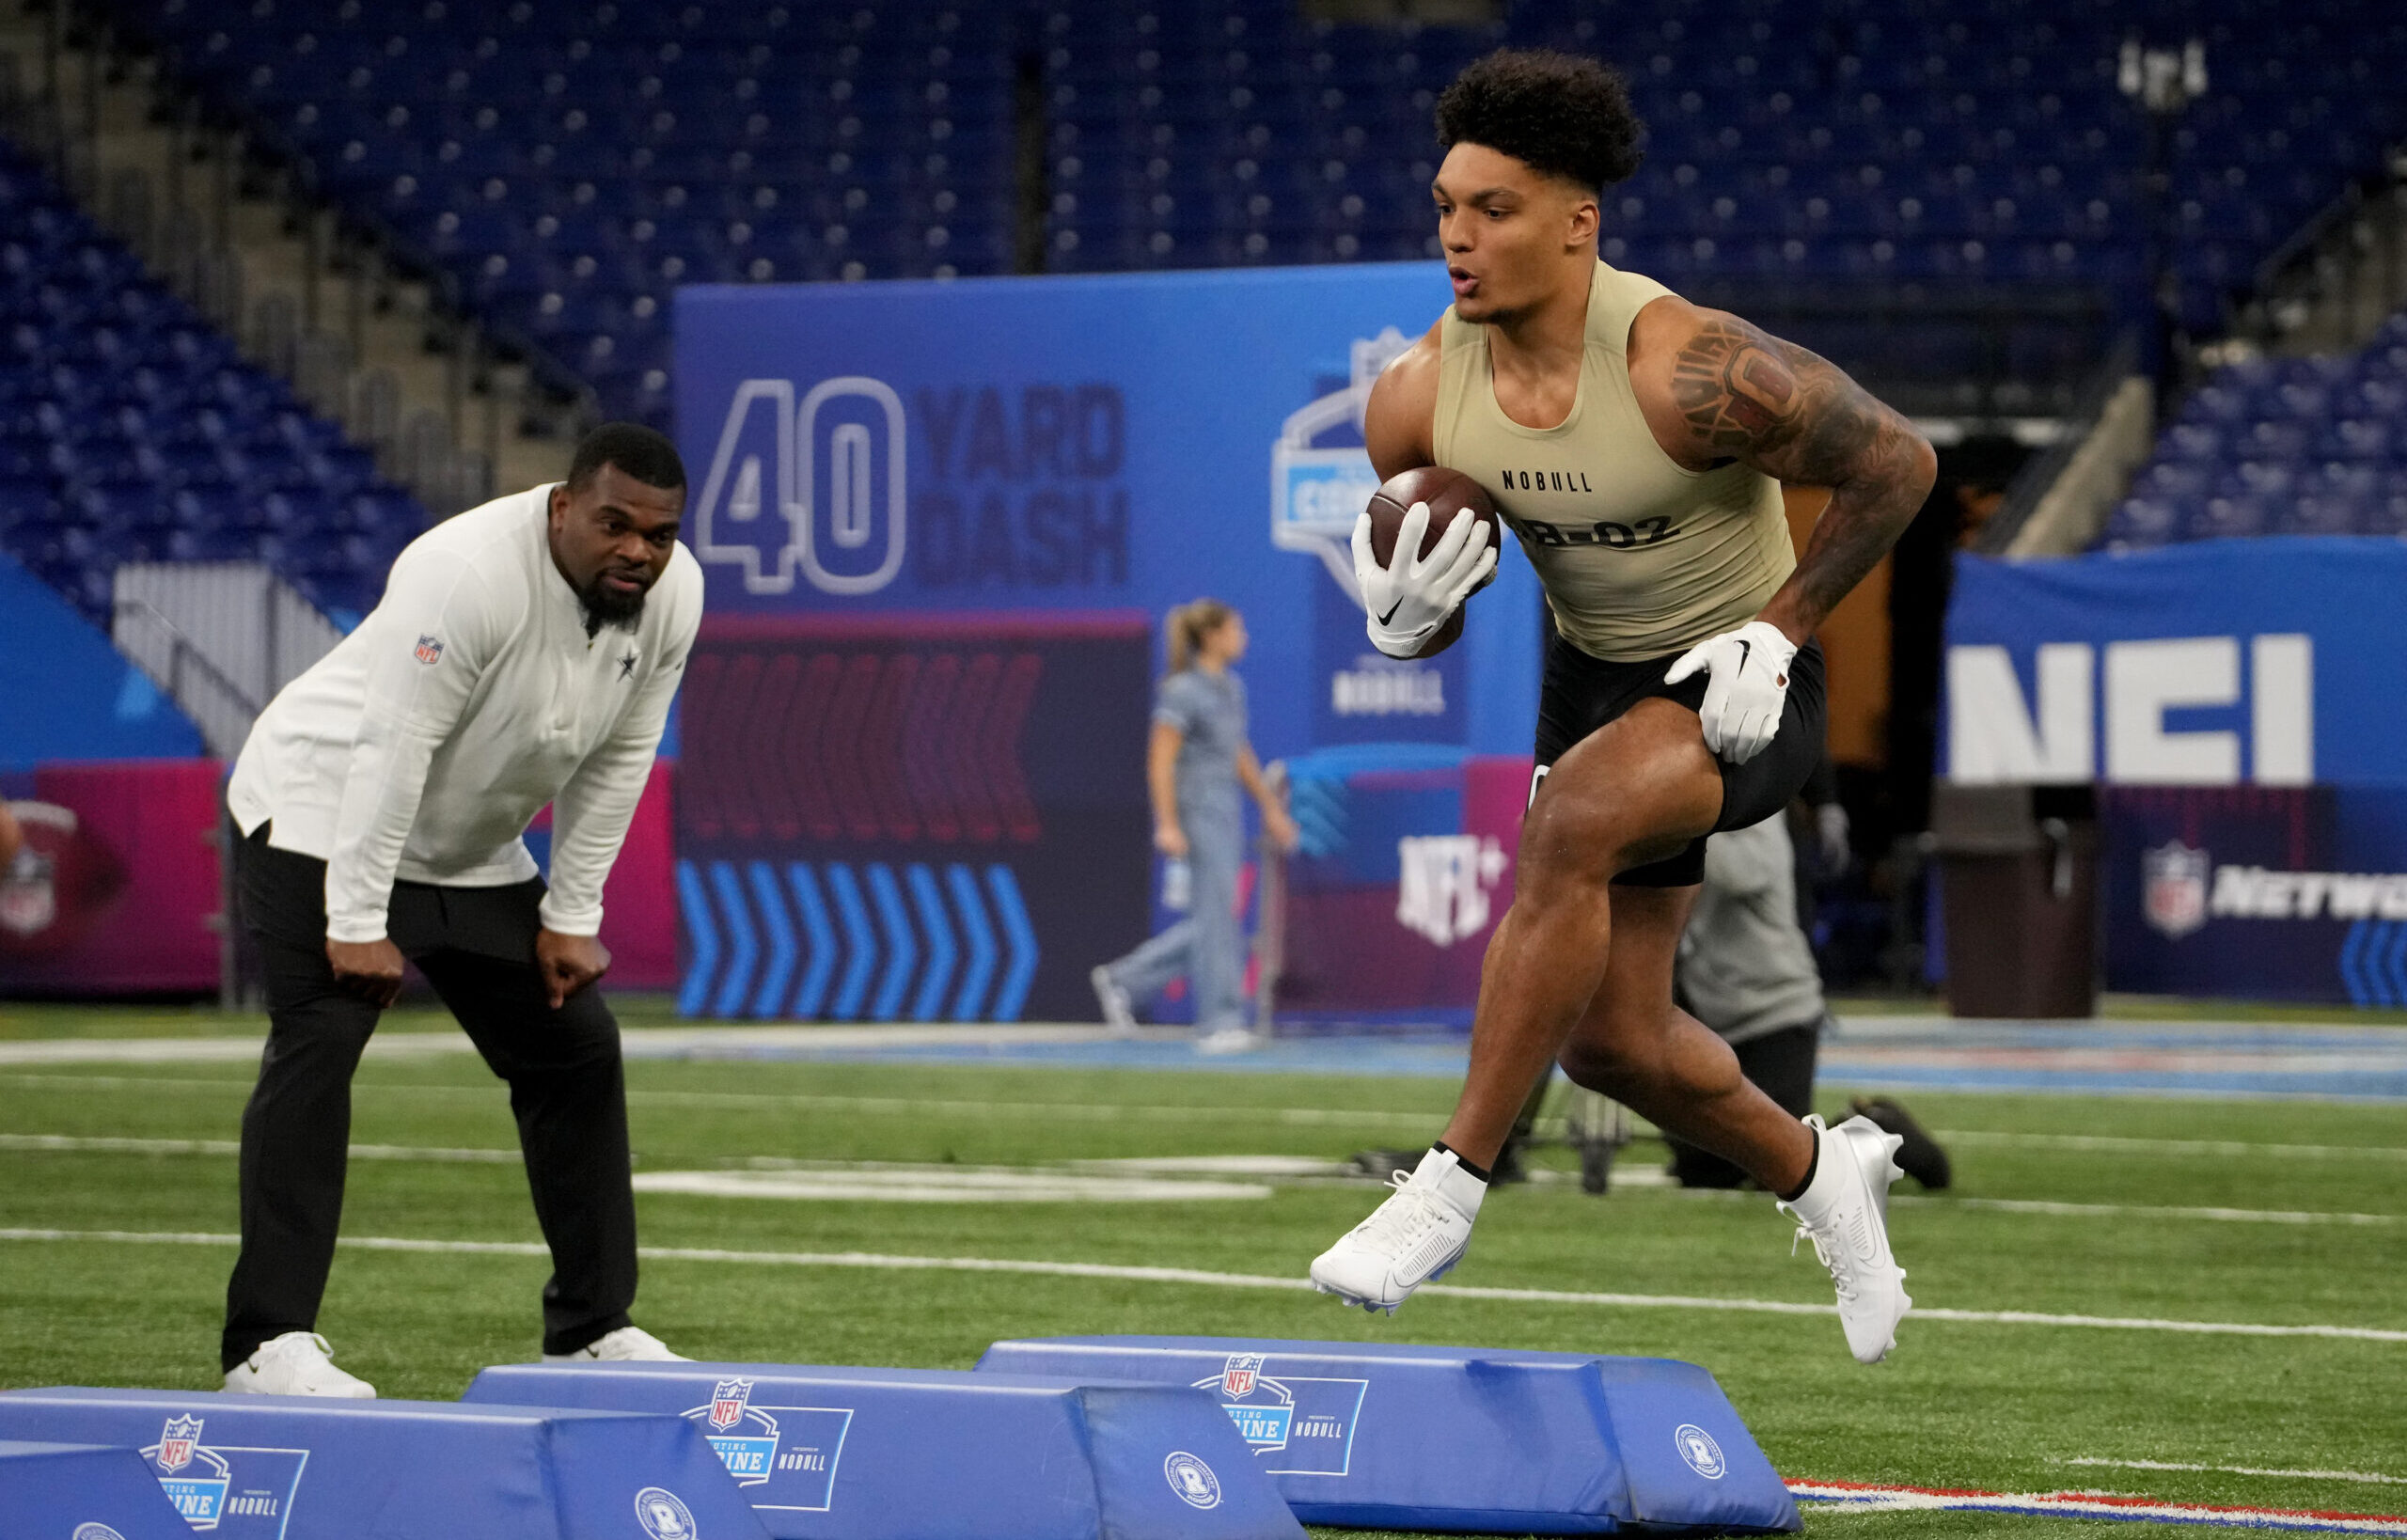 Wisconsin Badgers football player Braelon Allen at the NFL Scouting Combine